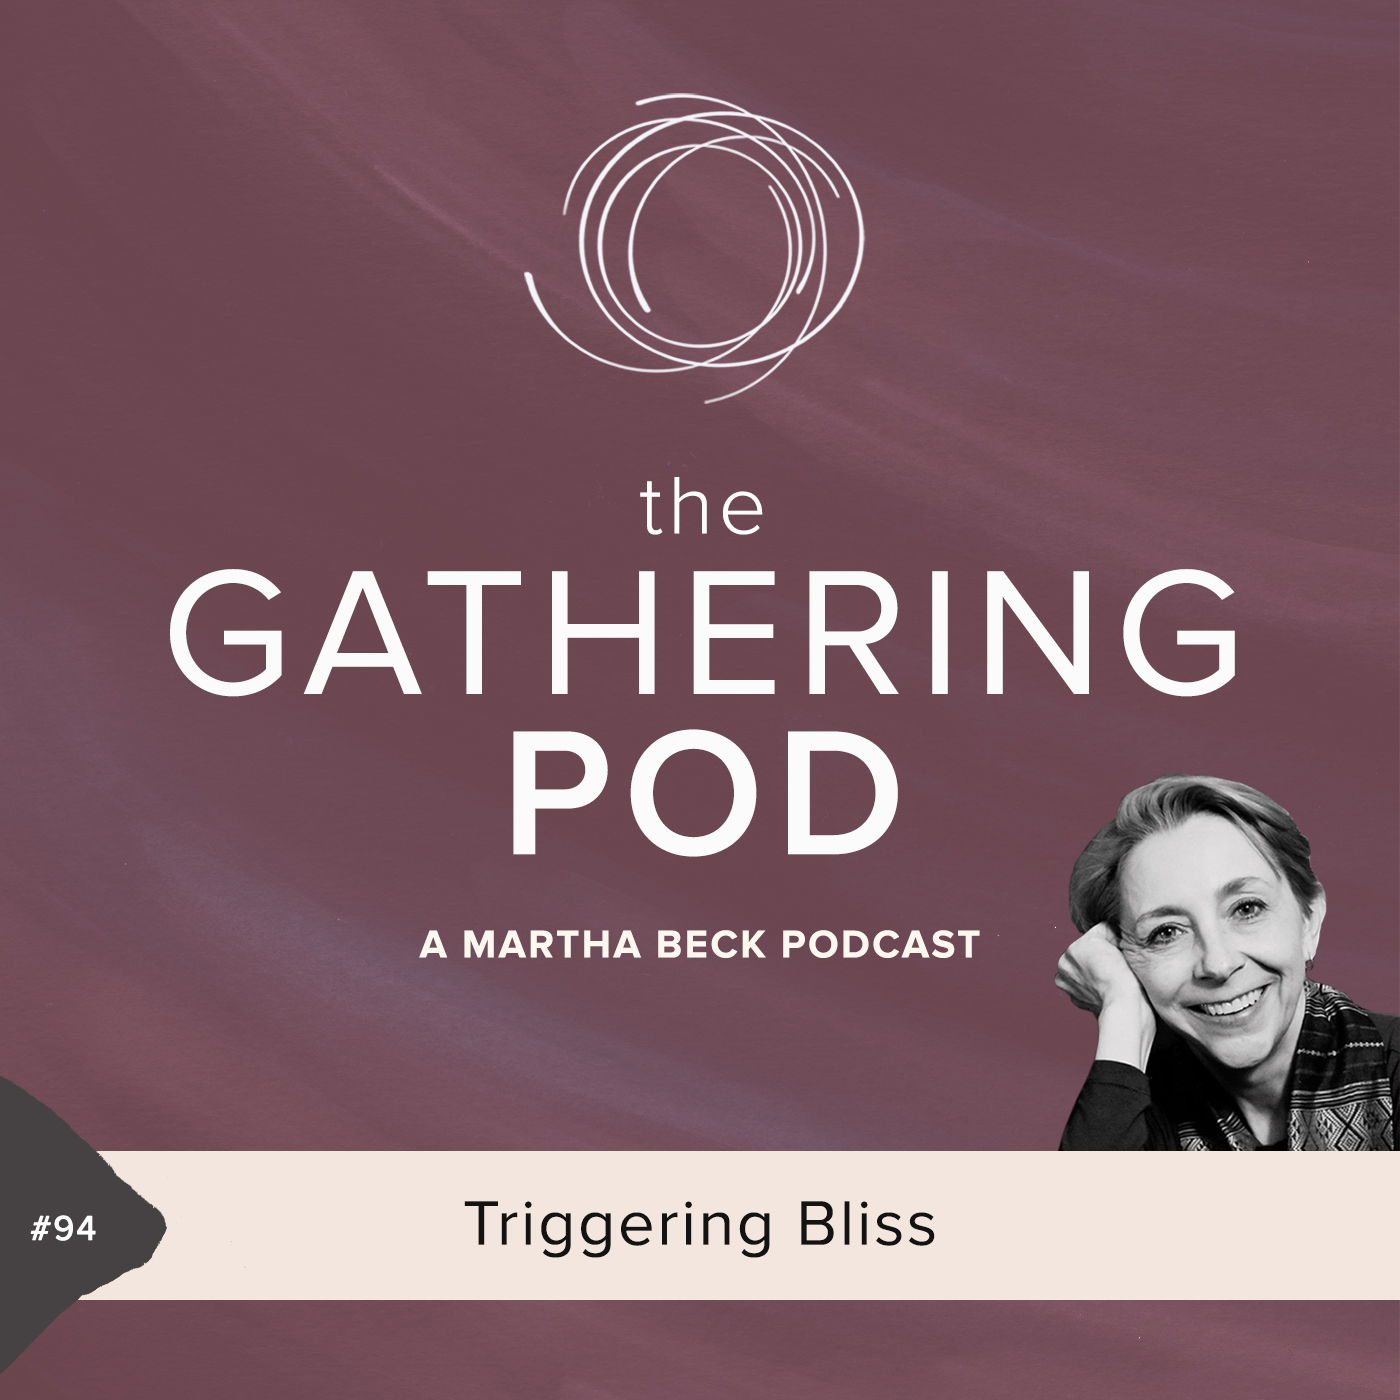 Image for The Gathering Pod A Martha Beck Podcast Episode #94 Triggering Bliss